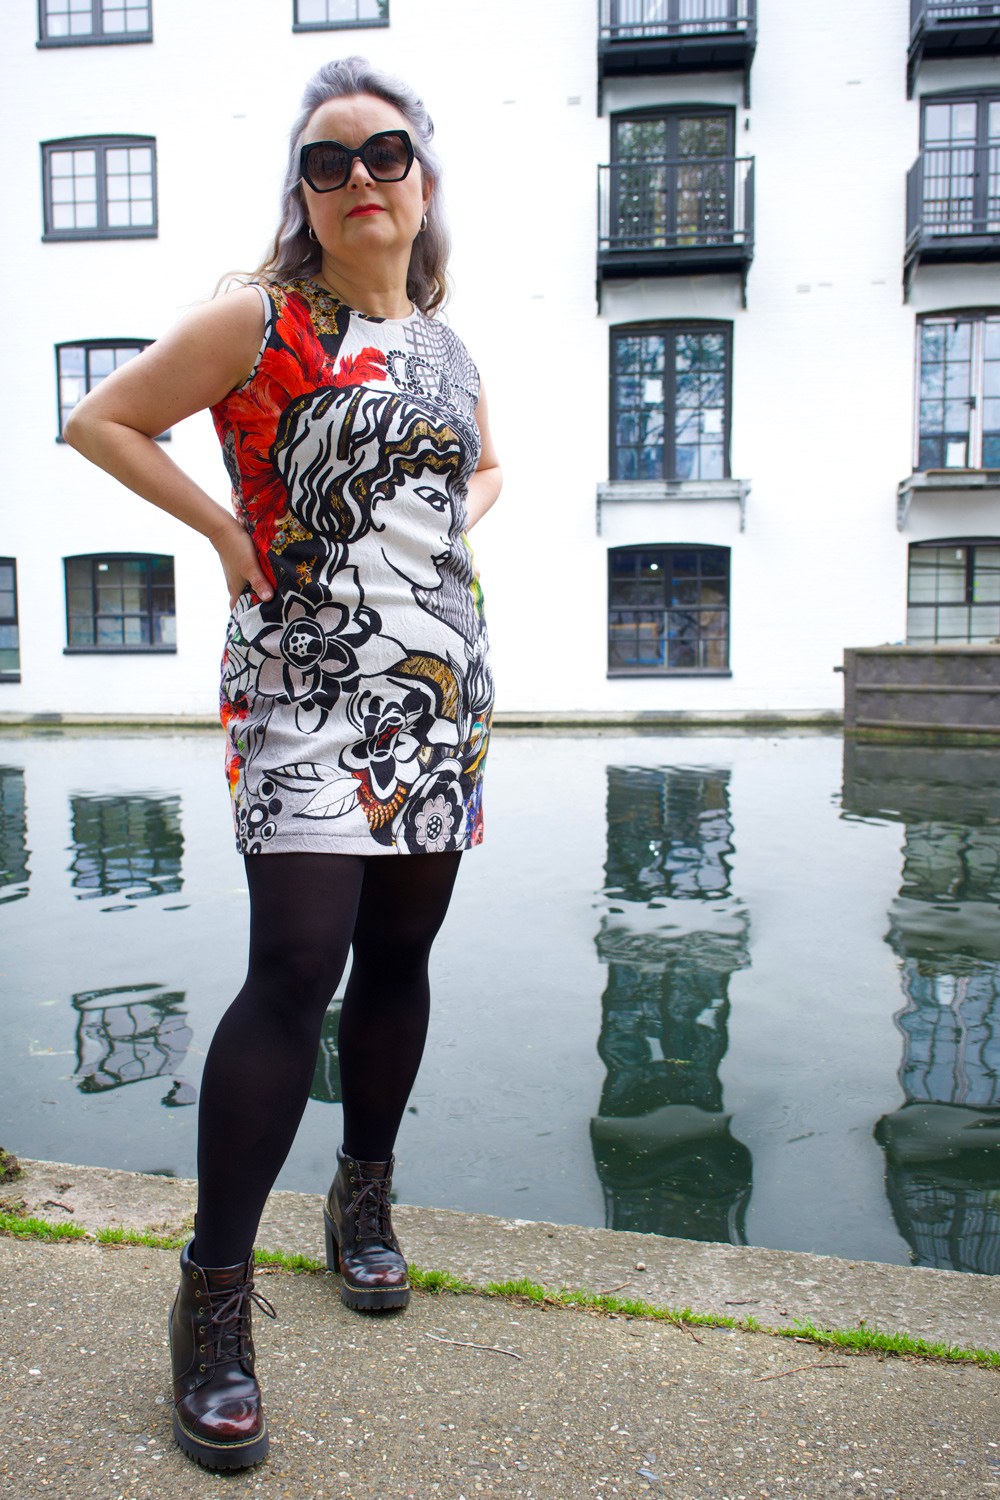 Putting my self-drafted leggings to the test – ooobop